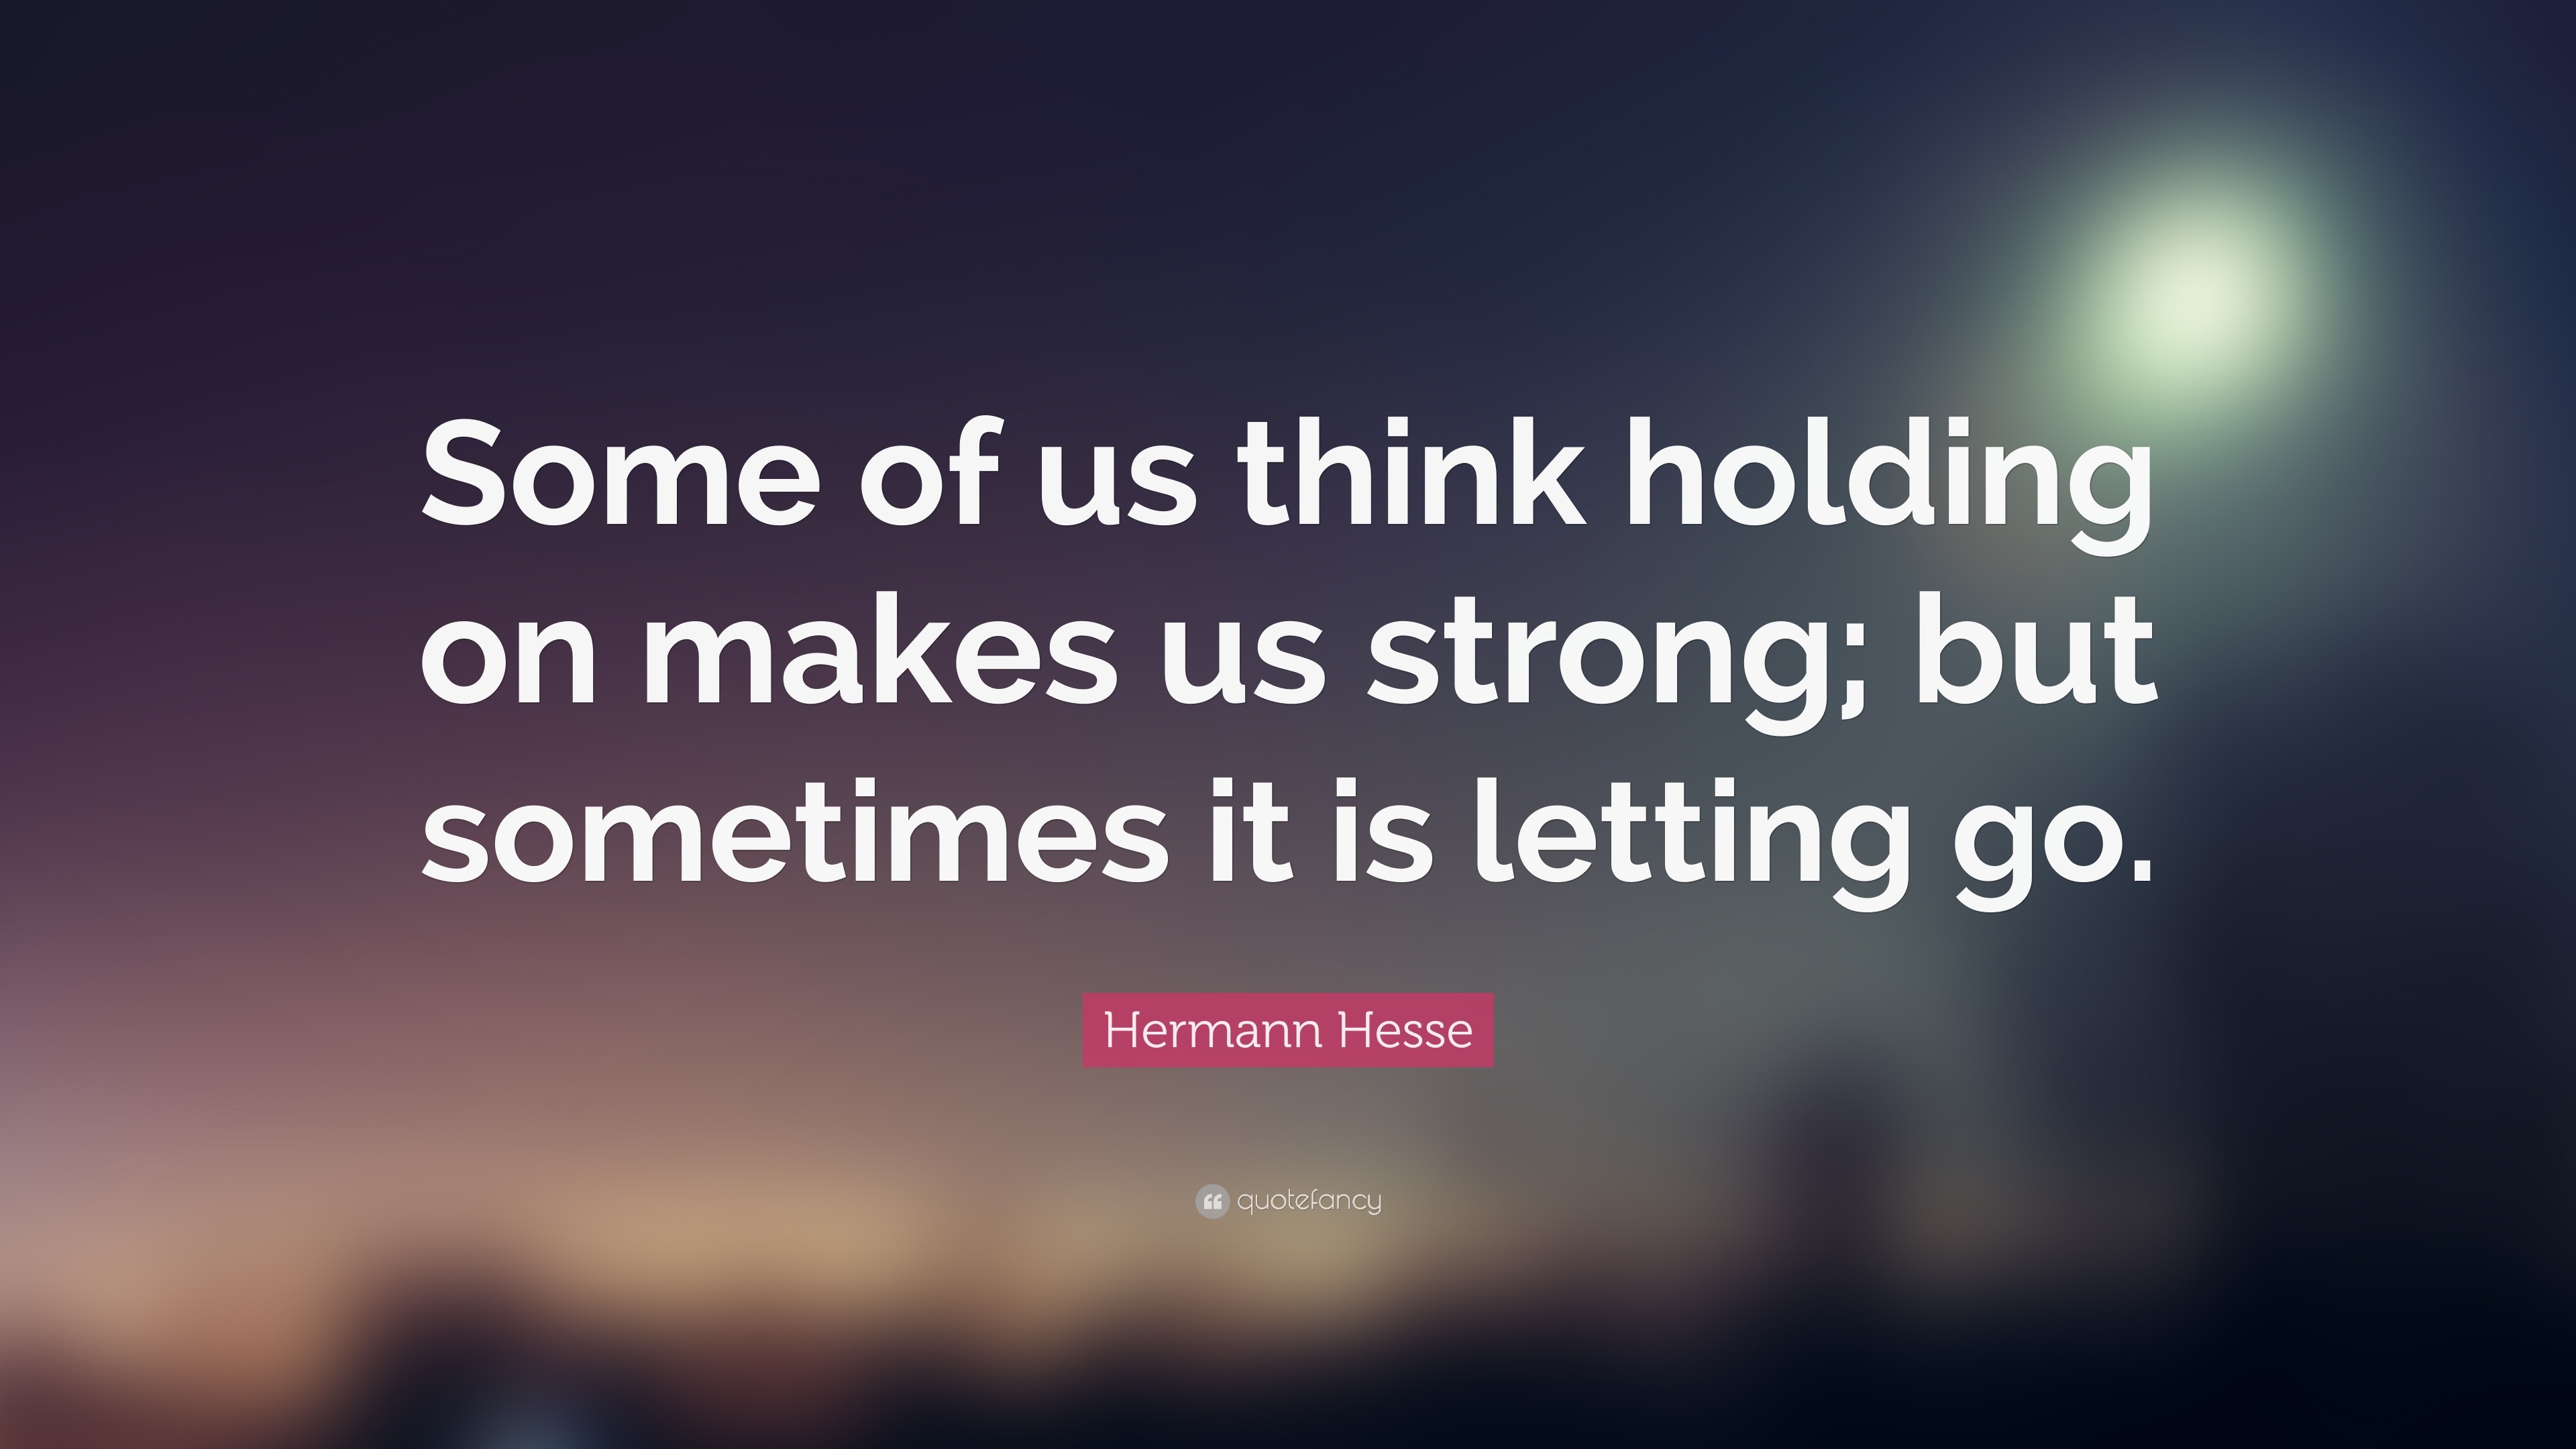 Hermann Hesse Quote: “Some of us think holding on makes us strong; but